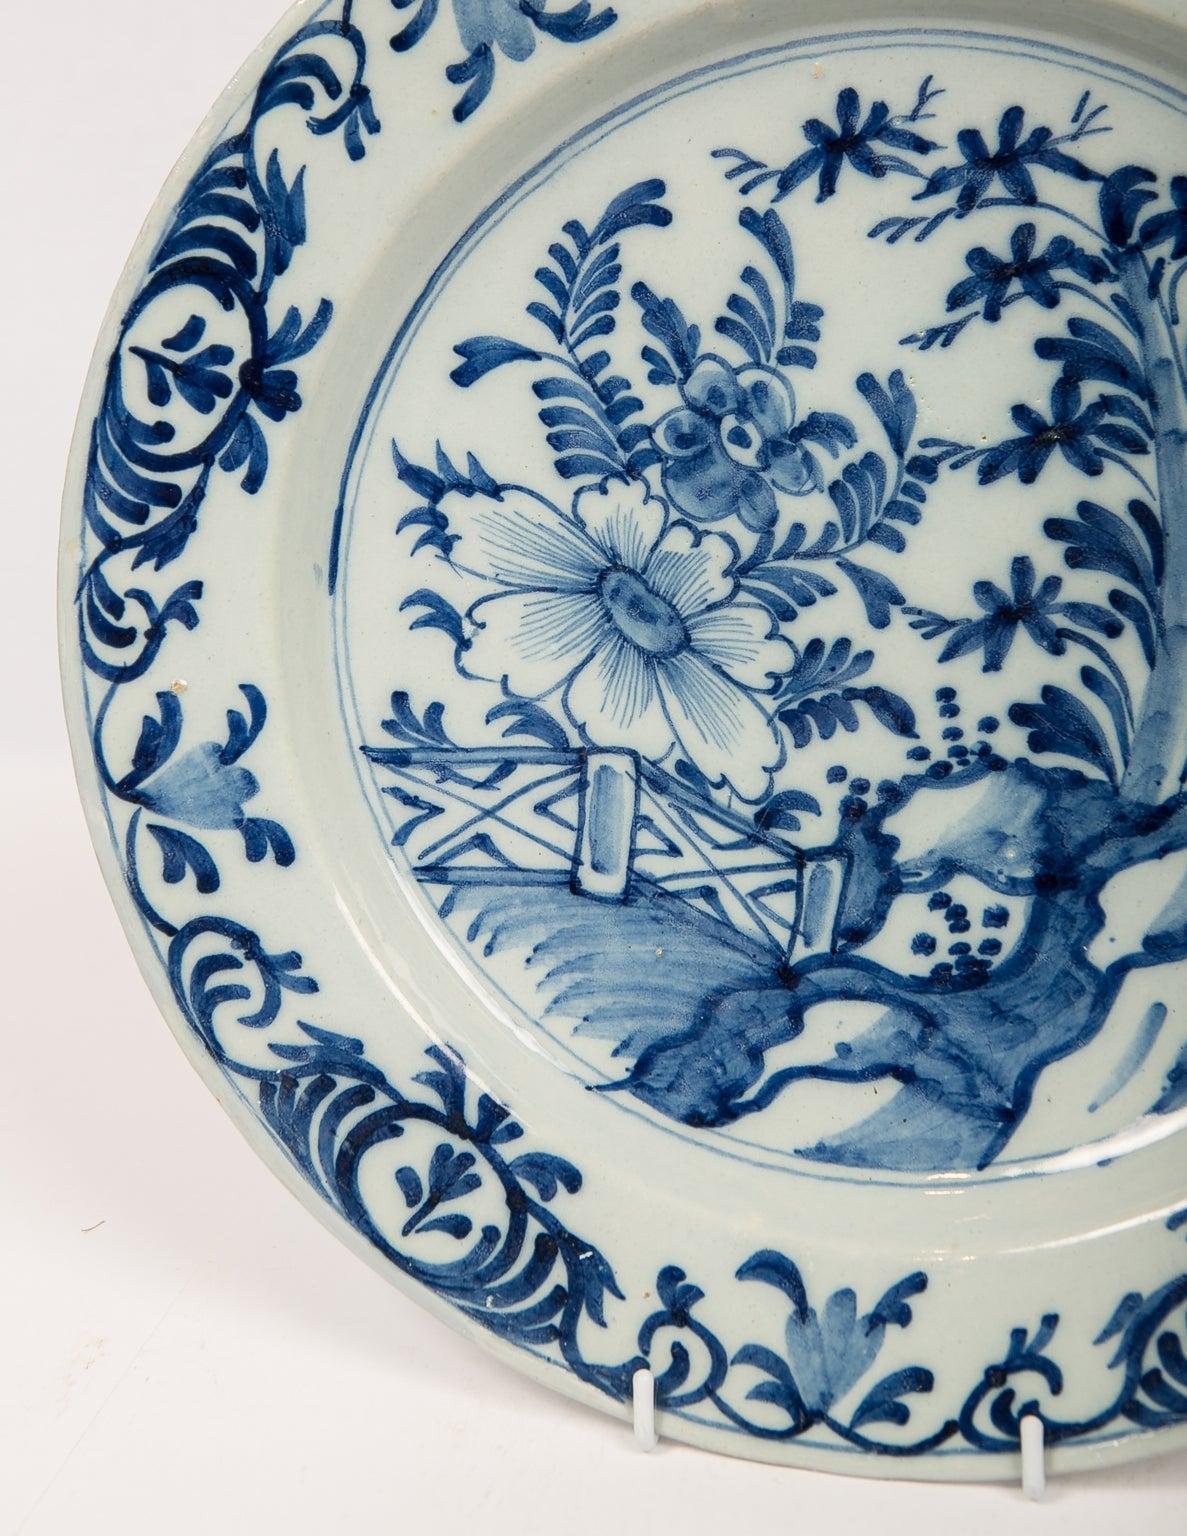 Eleven Antique Large Delft Blue and White Chargers, Late 18th Century 5